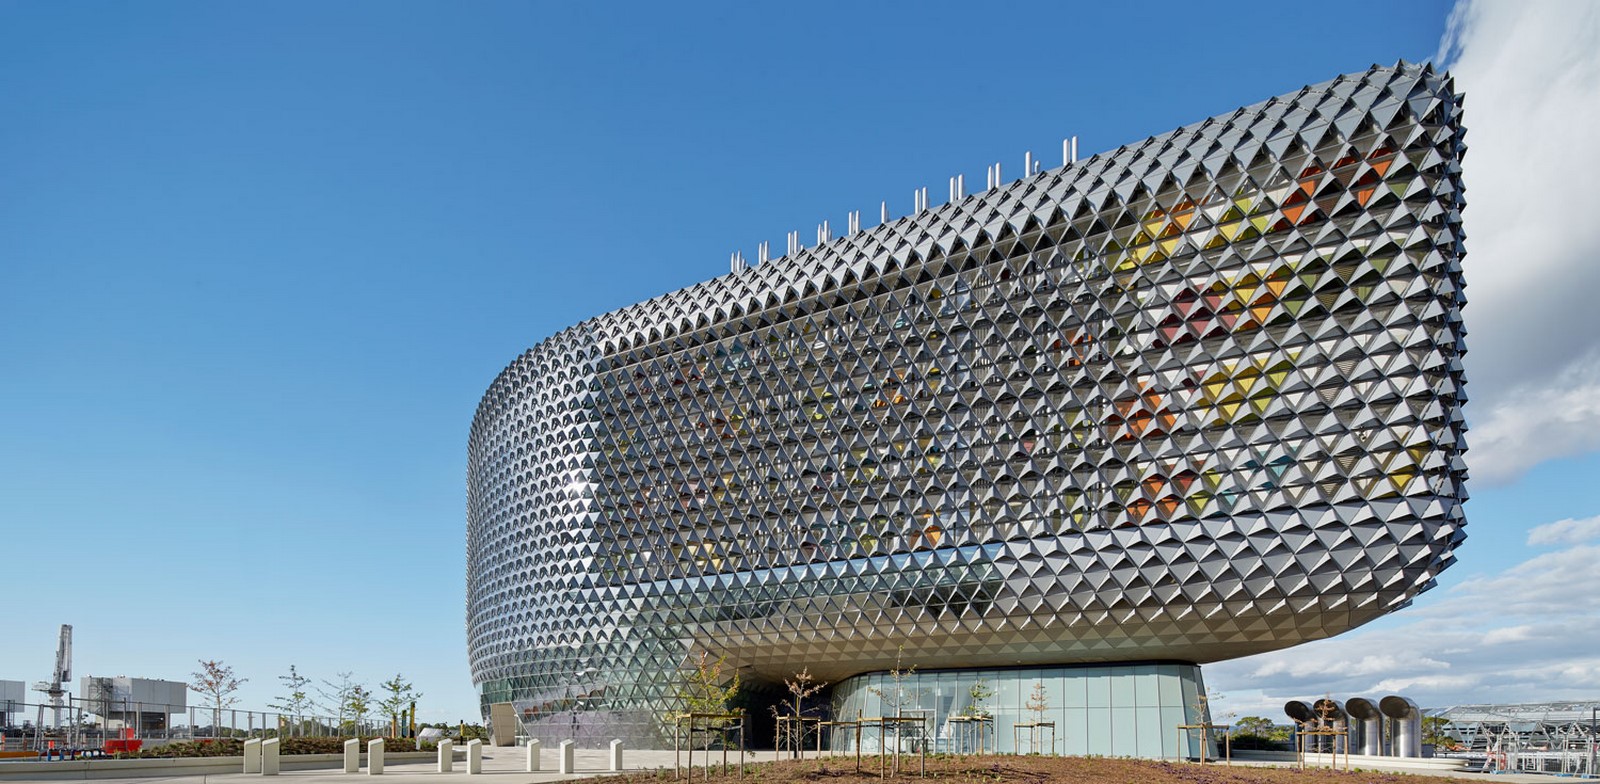 South Australia health and medical research institute by Woods Bagot - Sheet1